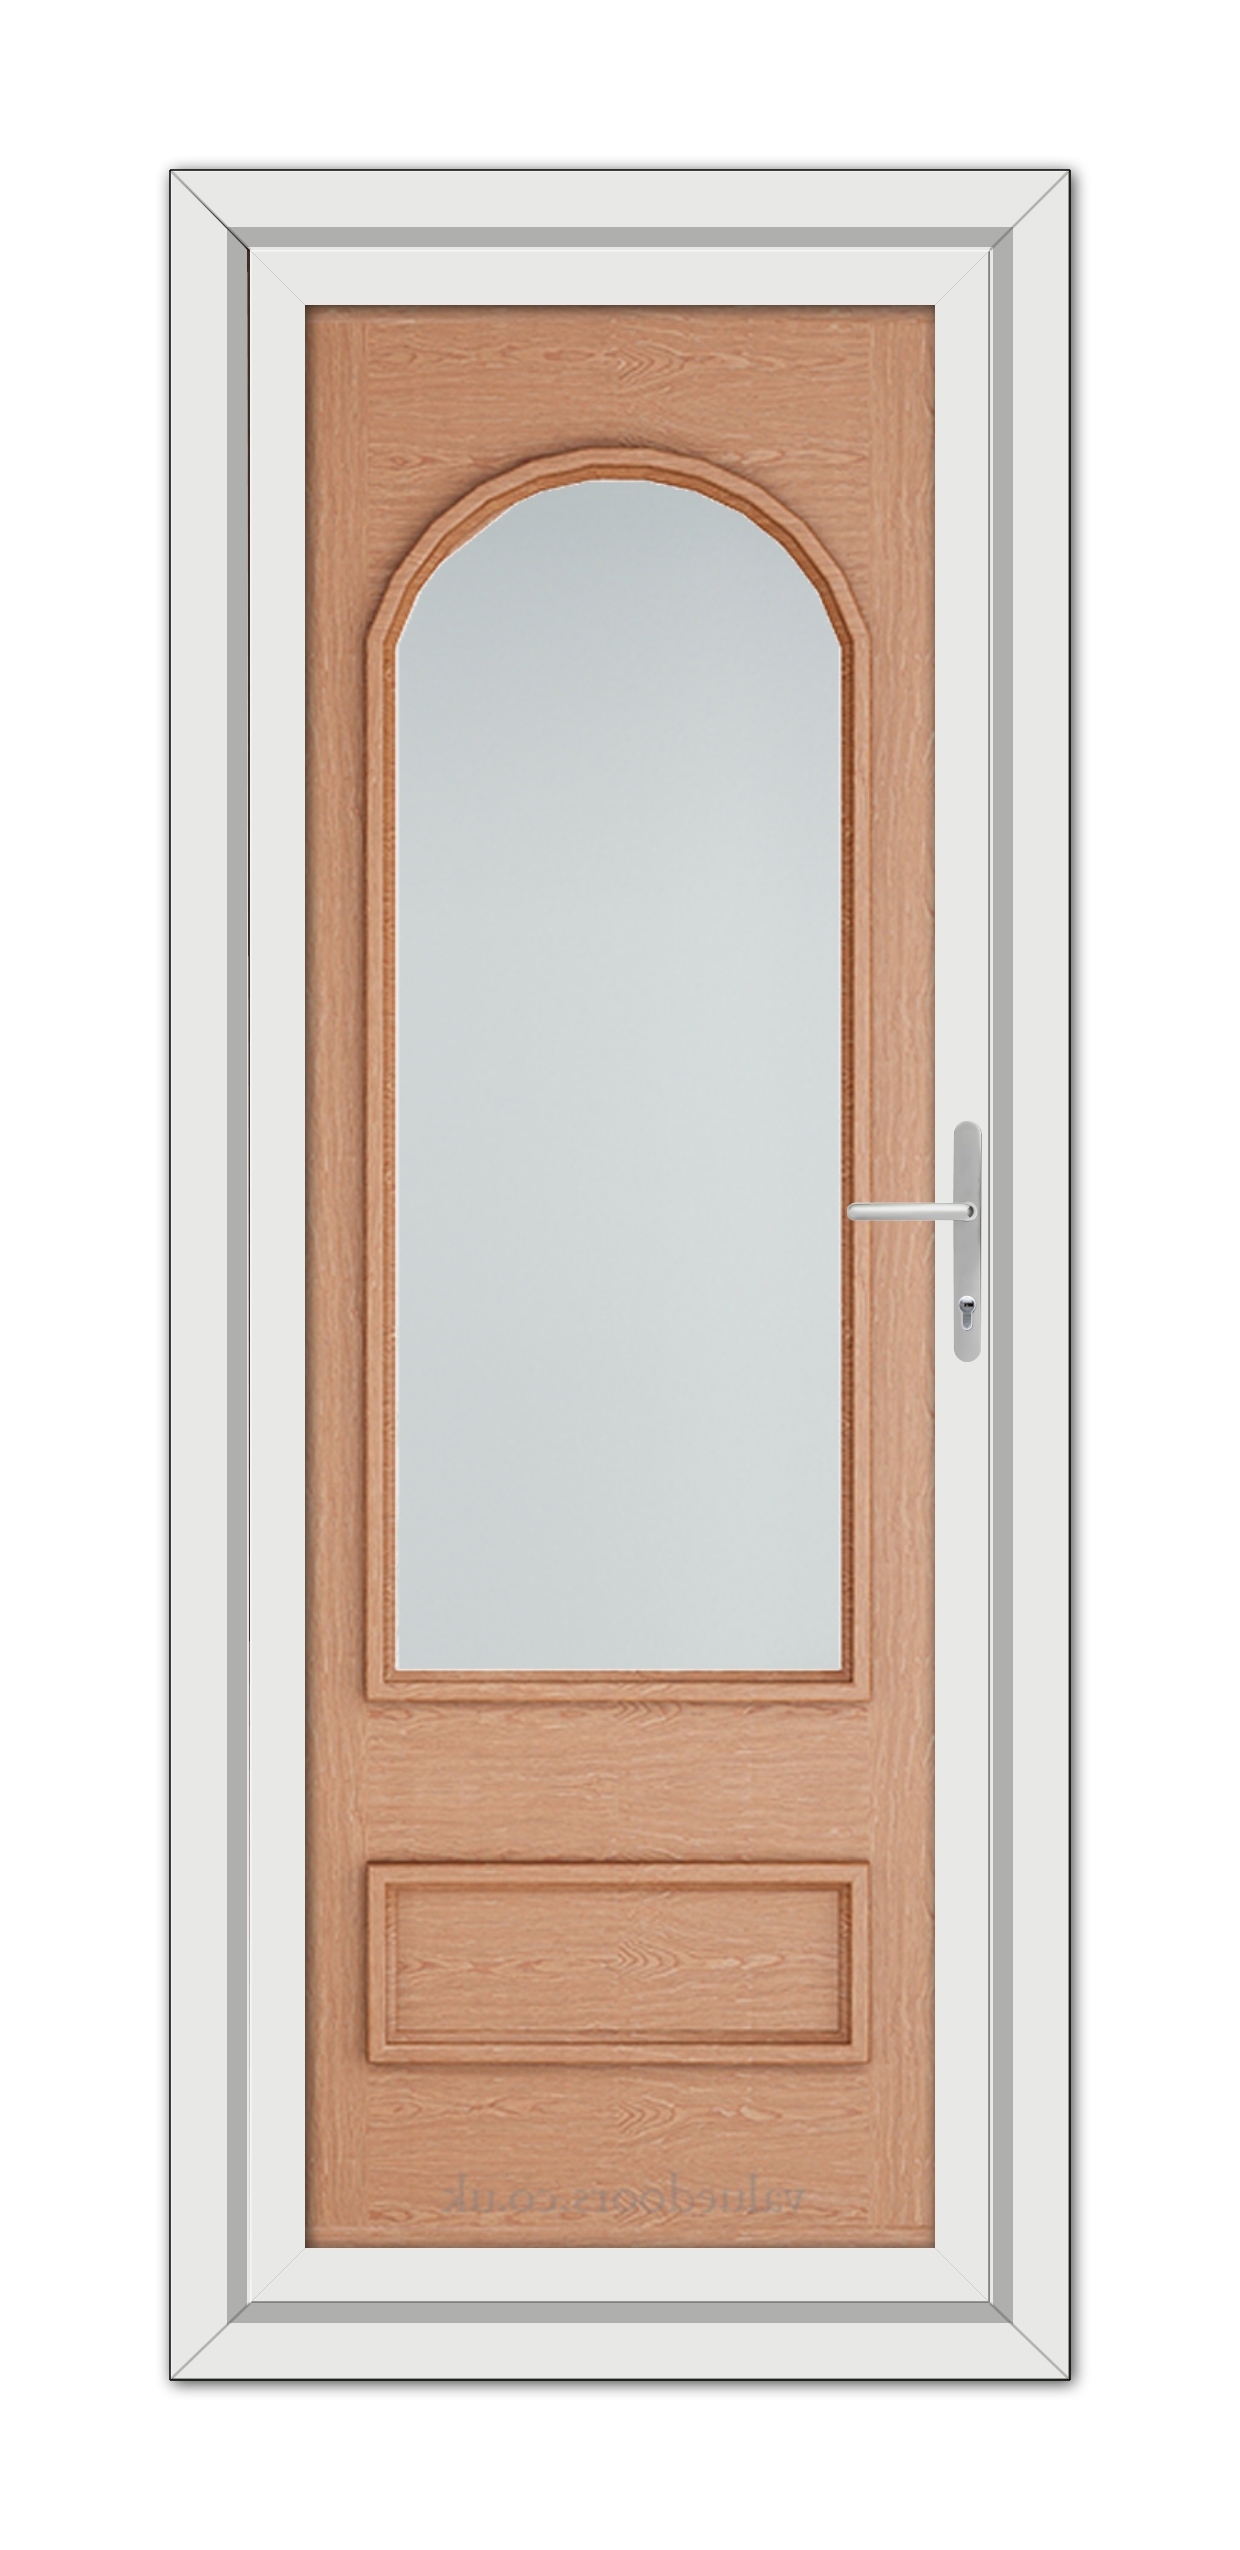 A Irish Oak Canterbury uPVC door with a large glass panel, set within a white door frame, viewed directly from the front.